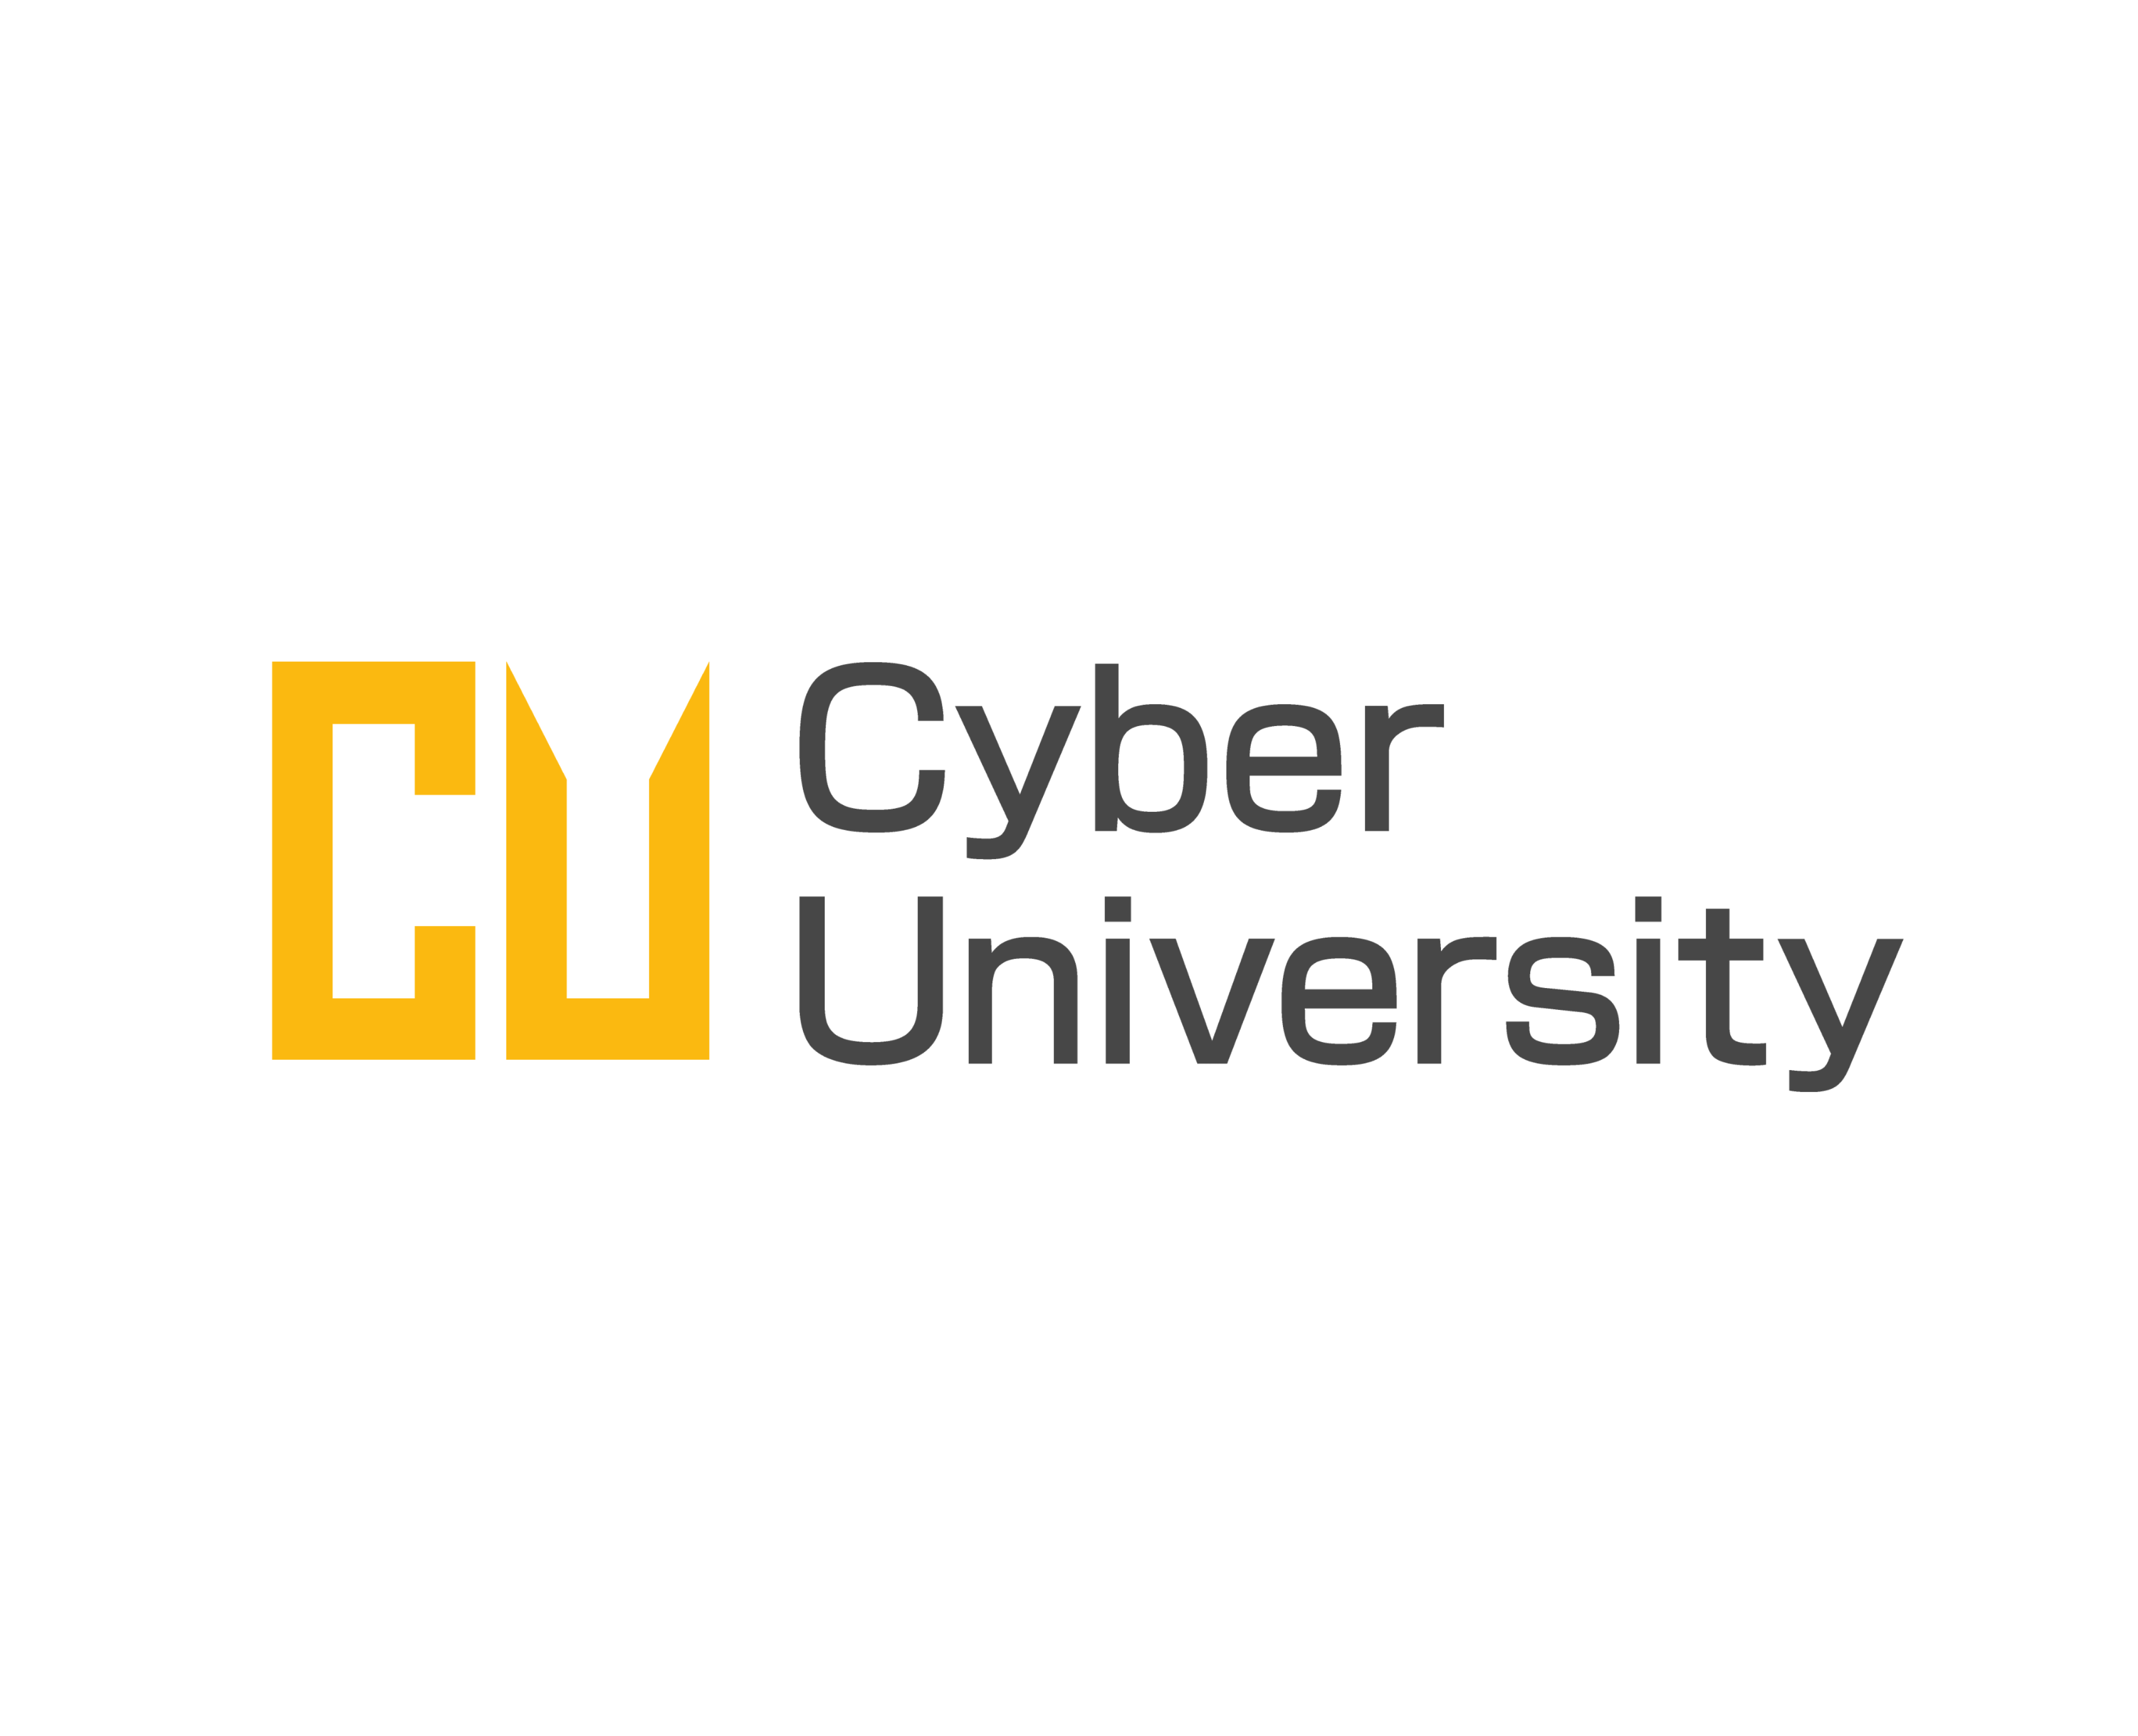 Cyber University's logo featured for Commune's case study